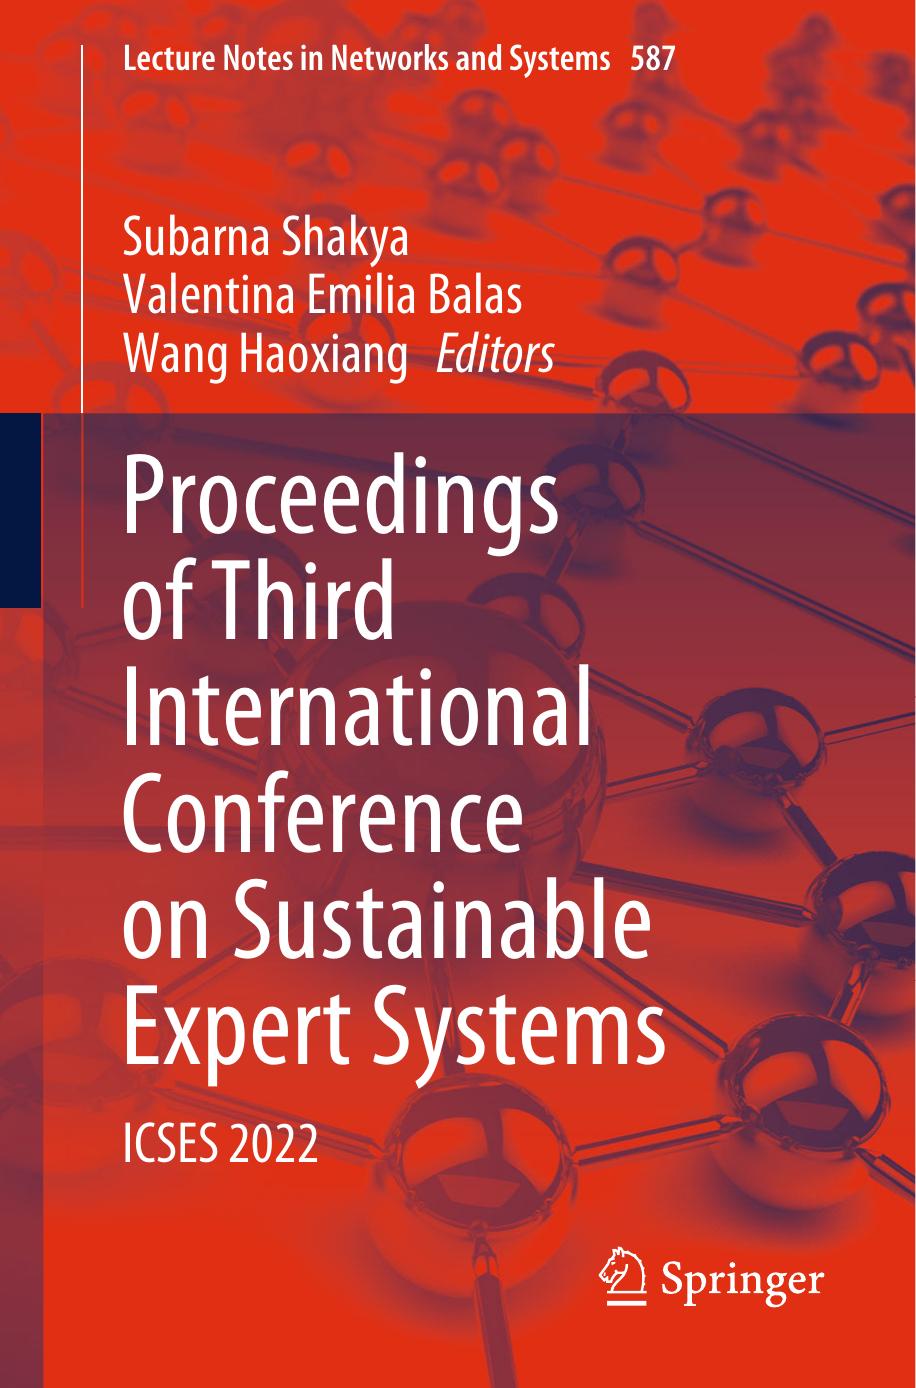 Proceedings of Third International Conference on Sustainable Expert Systems  ICSES 2022